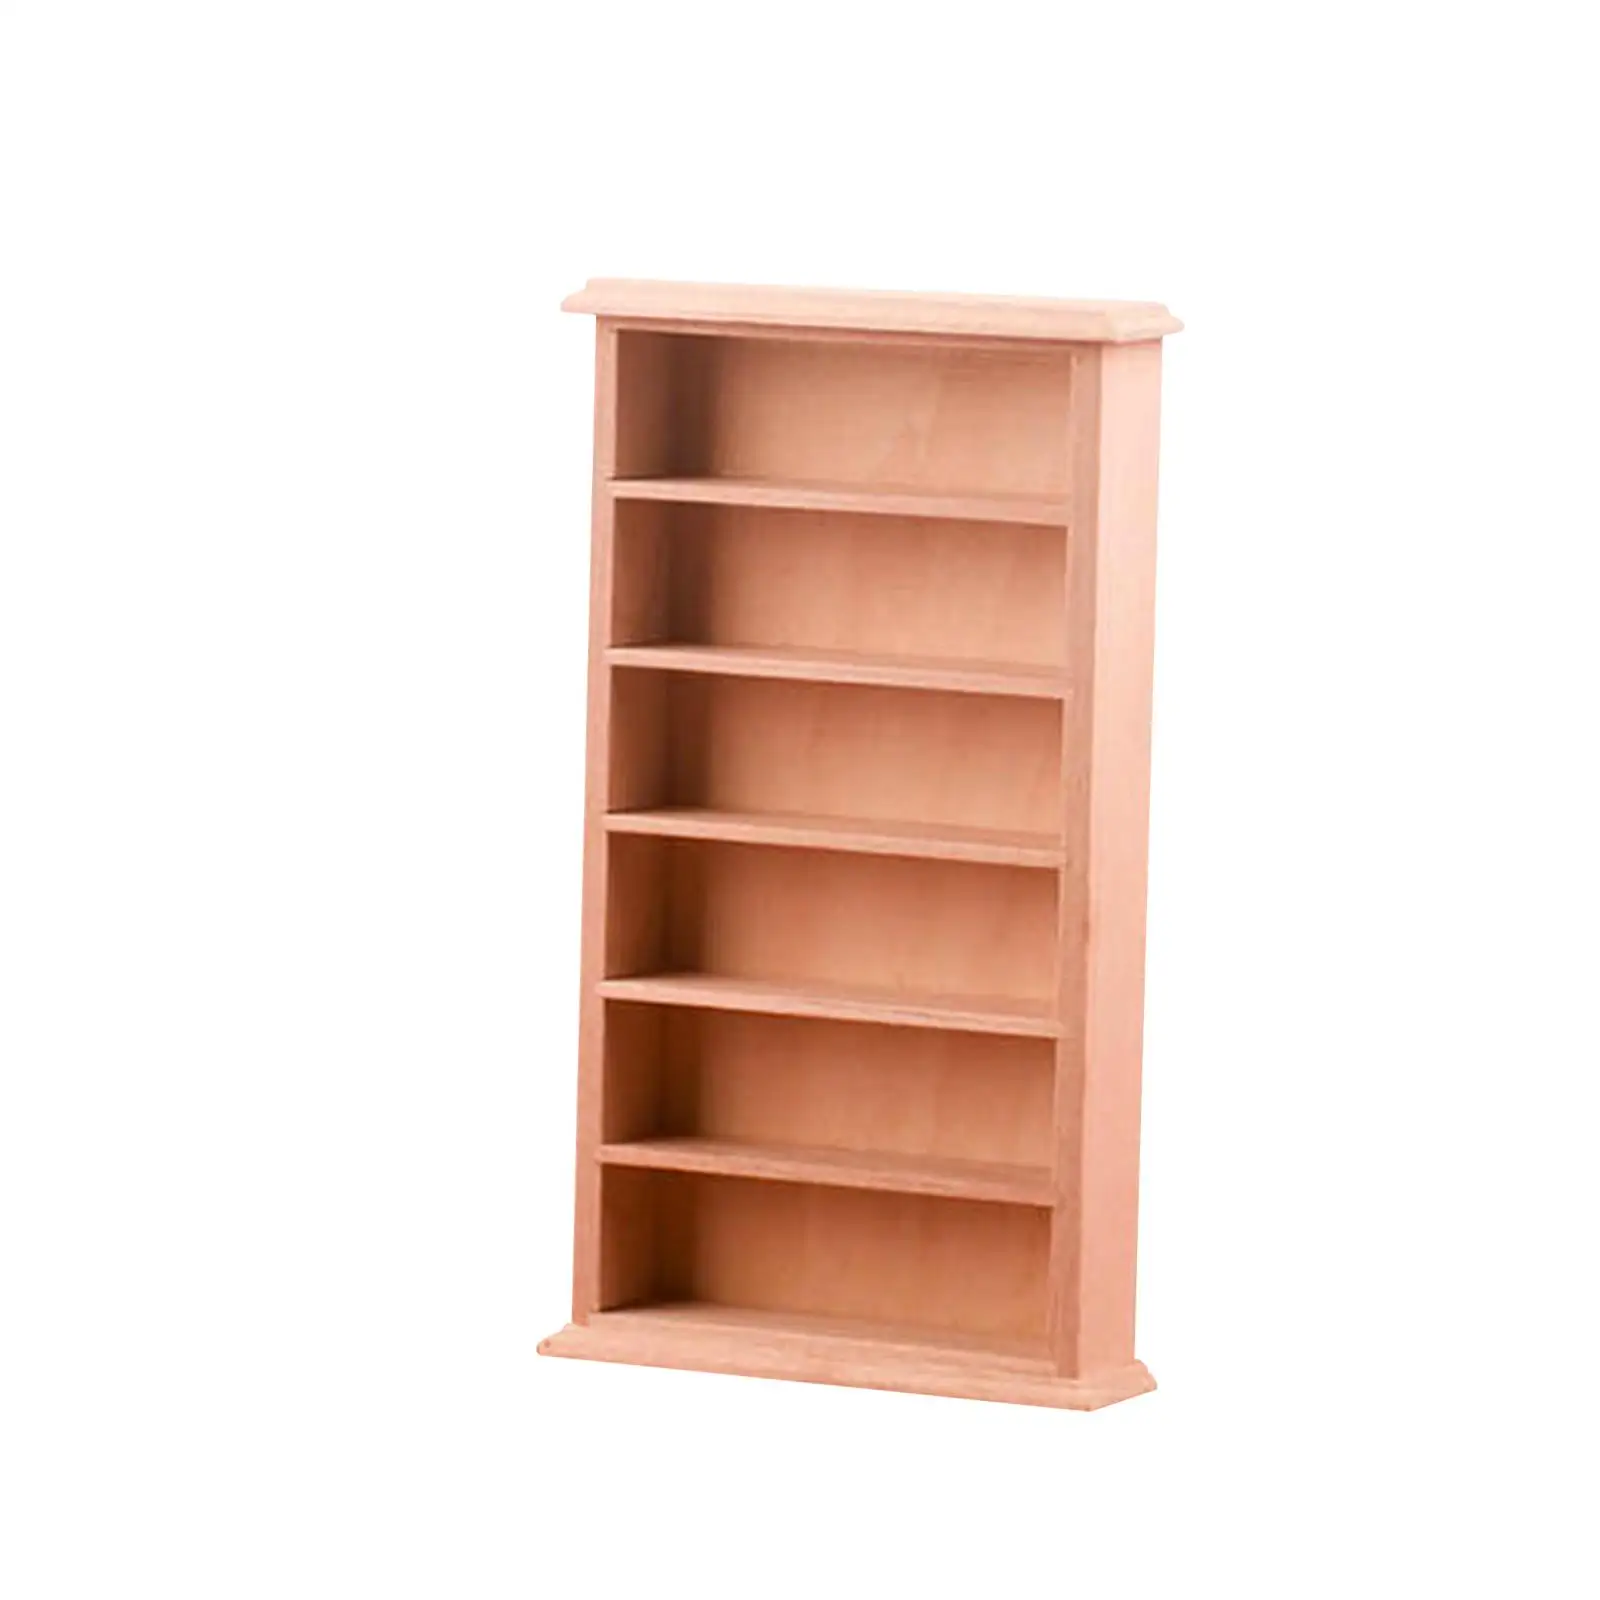 1:12 Wooden Display Shelf Life Scene Accessories Toys,Kitchen Bedroom Home Furniture,Simulation Dollhouse Bookcase Decoration